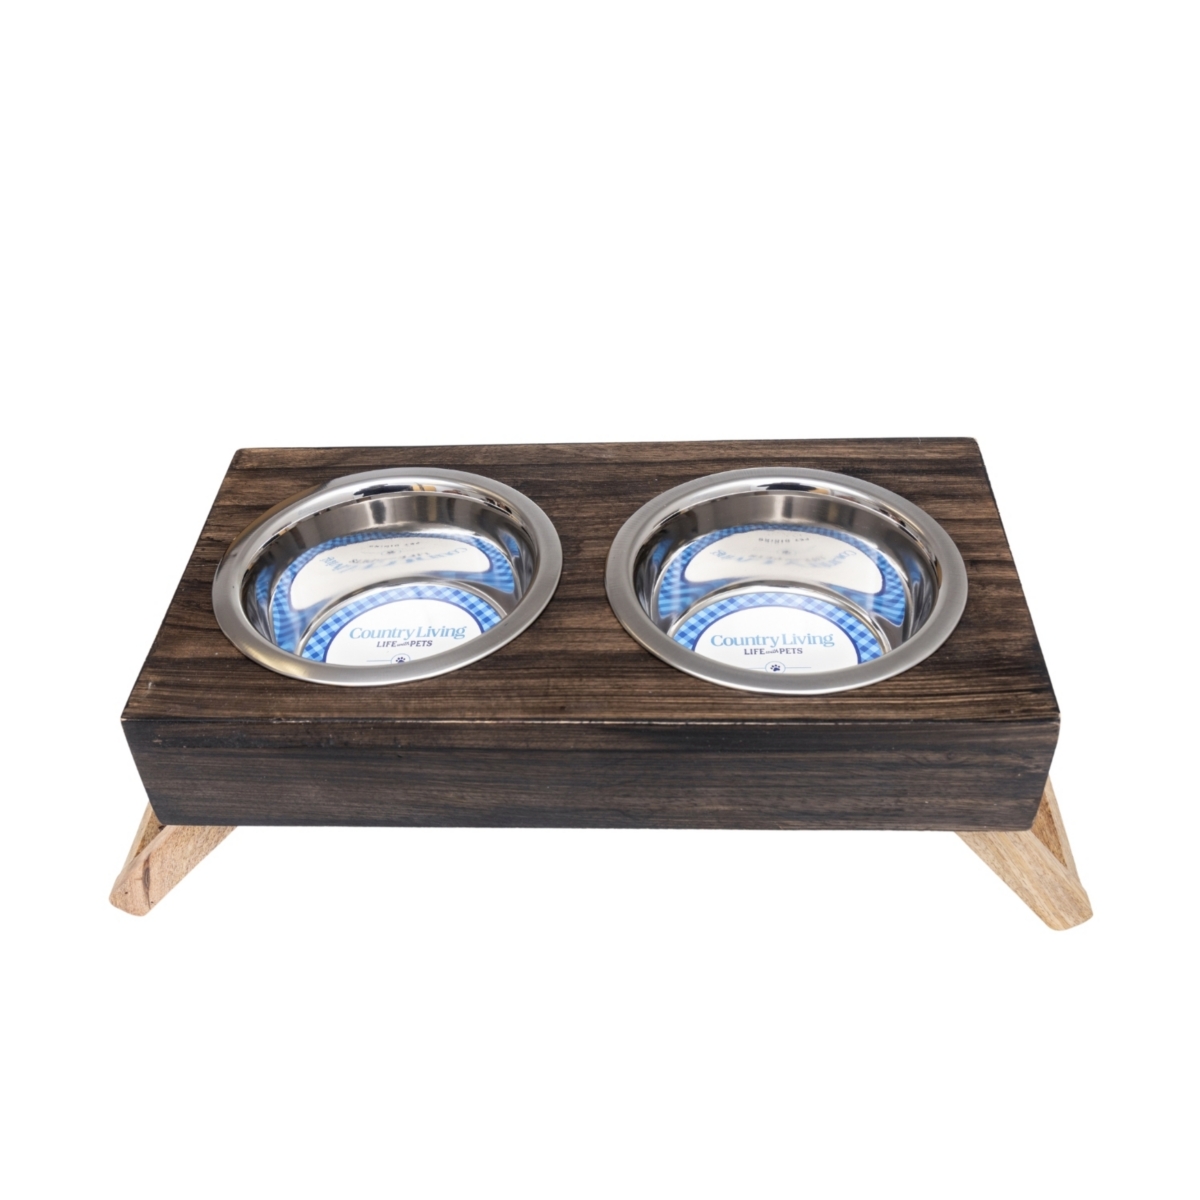 Country Living Classic Elevated Pet Feeder - Solid Mango Wood with Brown Polished Finish, Includes 2 Small (12 oz) Stainless Steel Bowls - Foldable Le